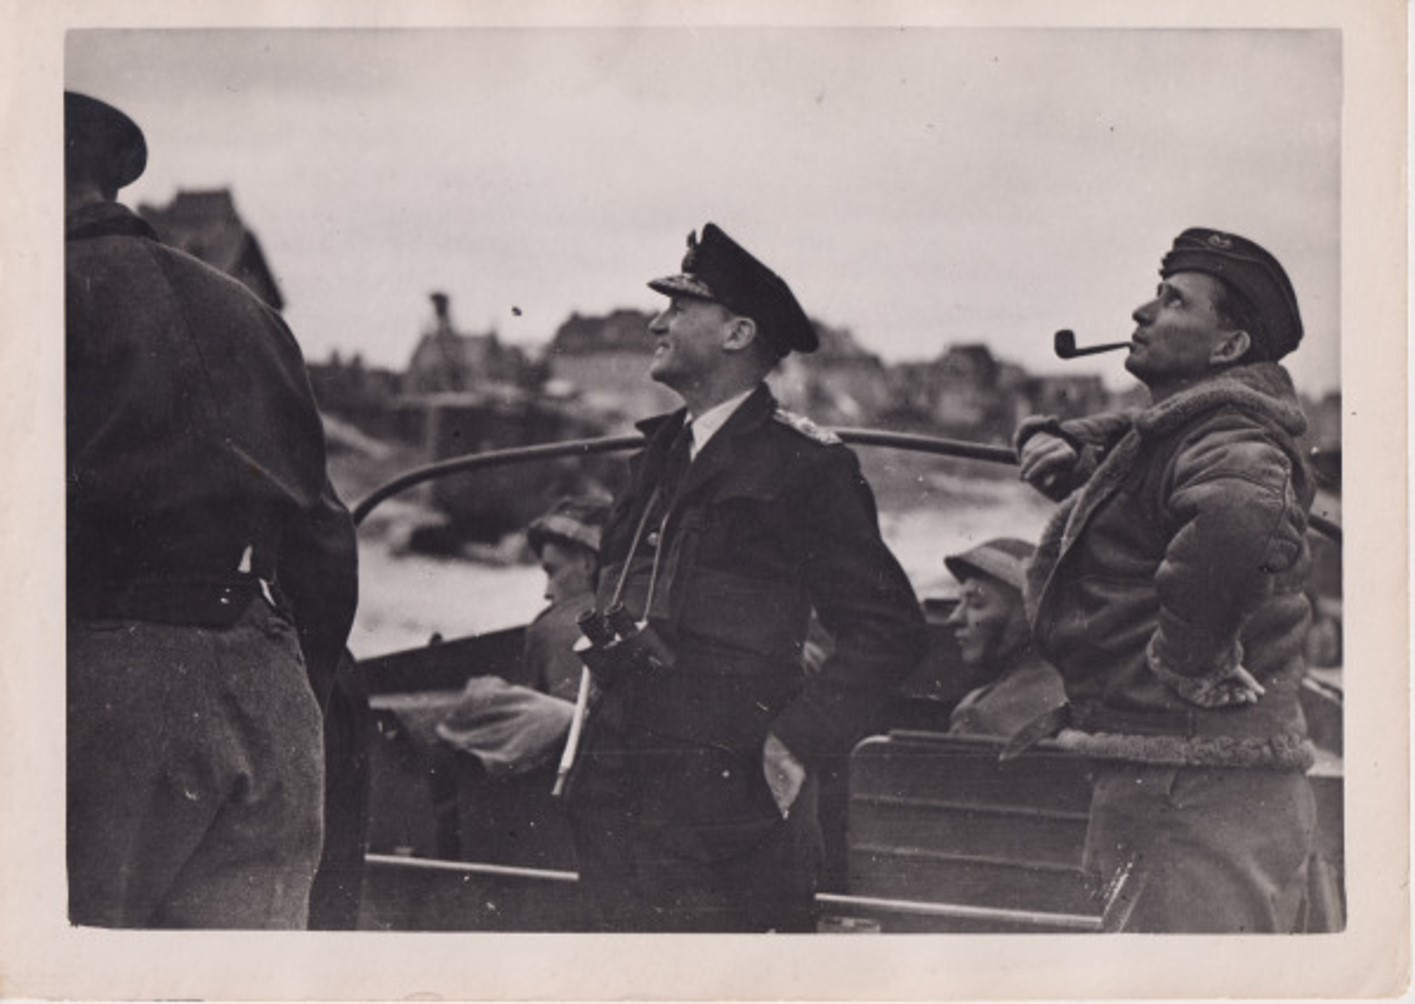 A photograph of Admiral Ramsay and Air Marshall Tedder off Normandy beach in 1944